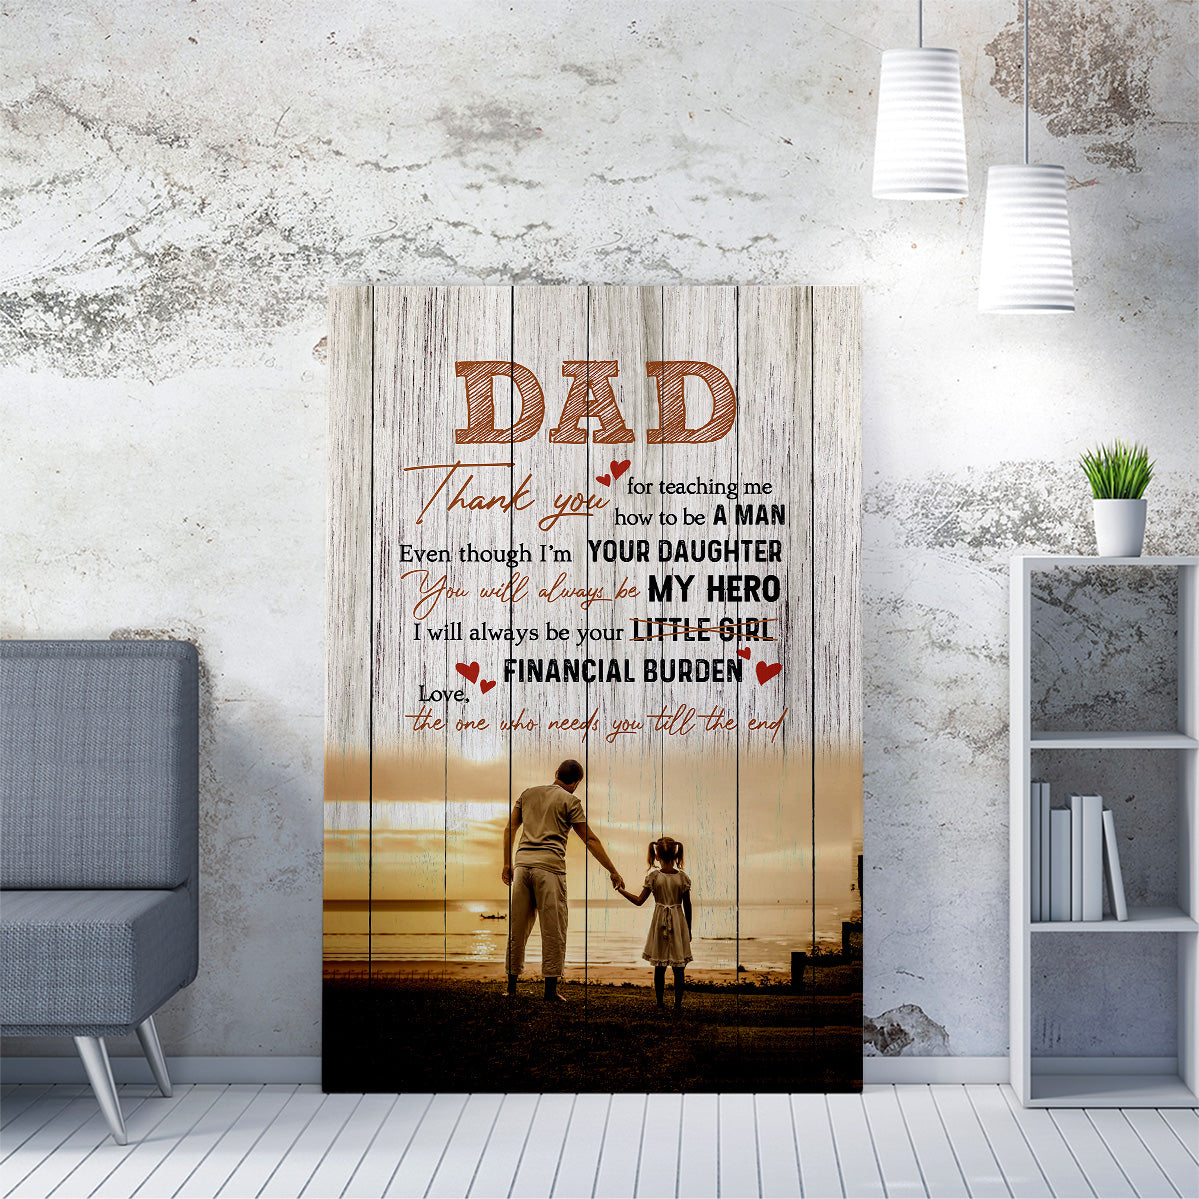 Personalized Canvas for Fathers day, Dad Thank You For Teaching Me How To Be A Man Even I'm Your Daughter Financial Burden, Custom Photos Names, Gift From Daughter